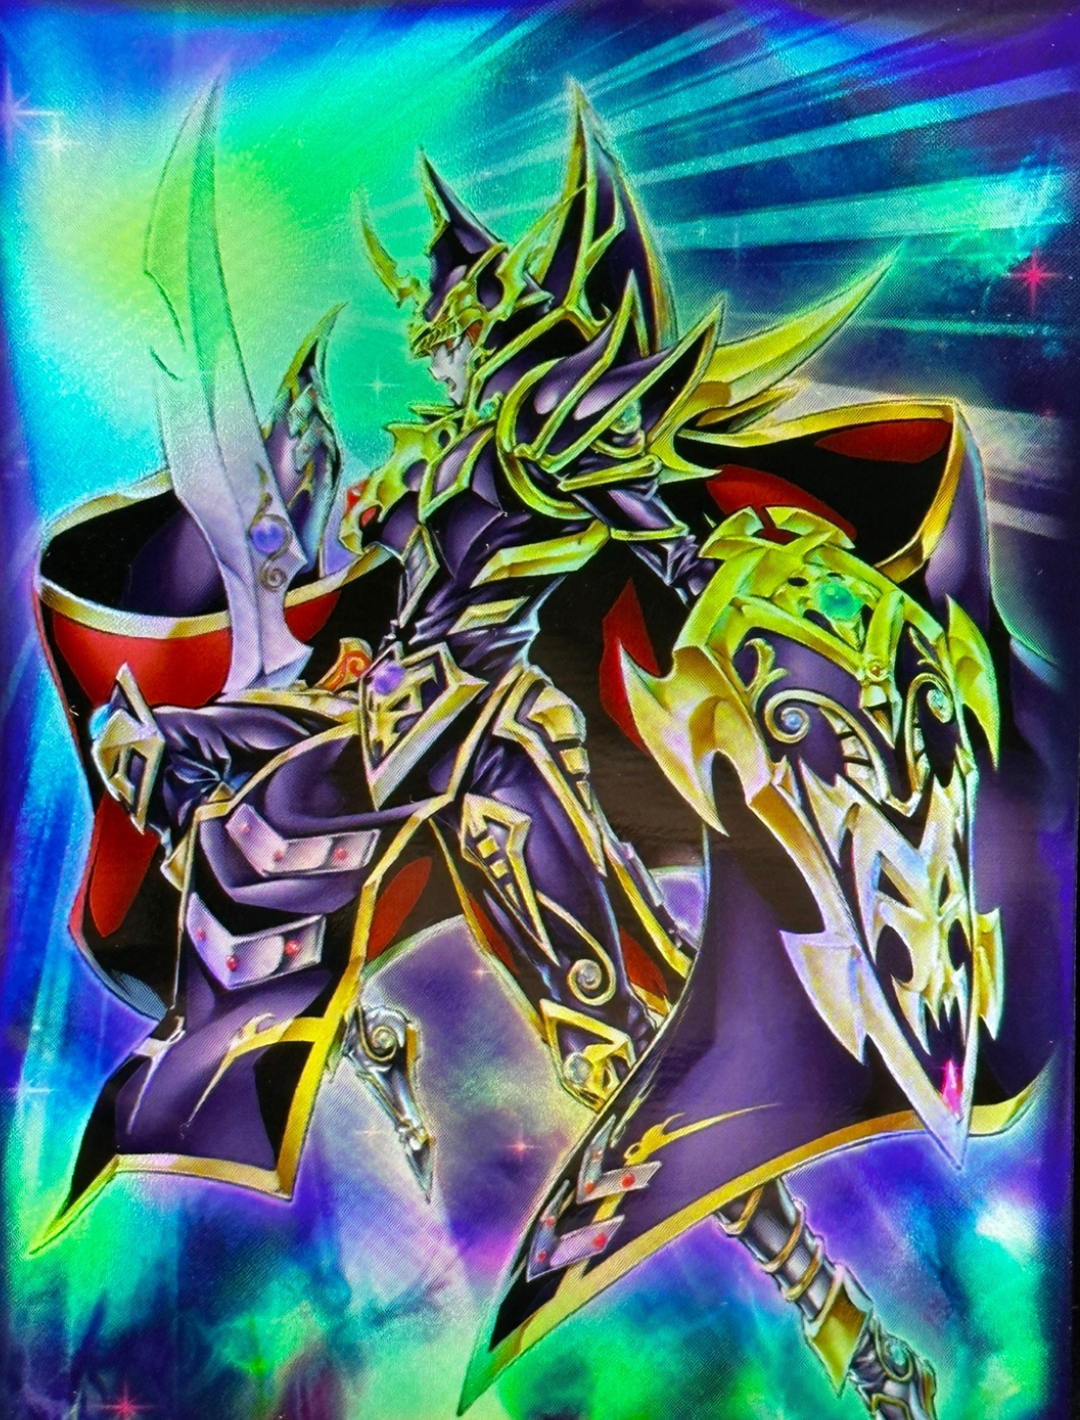 Yu-Gi-Oh! Extra Deck Card Sleeves - Master of Chaos (15 STK) - sleevechief